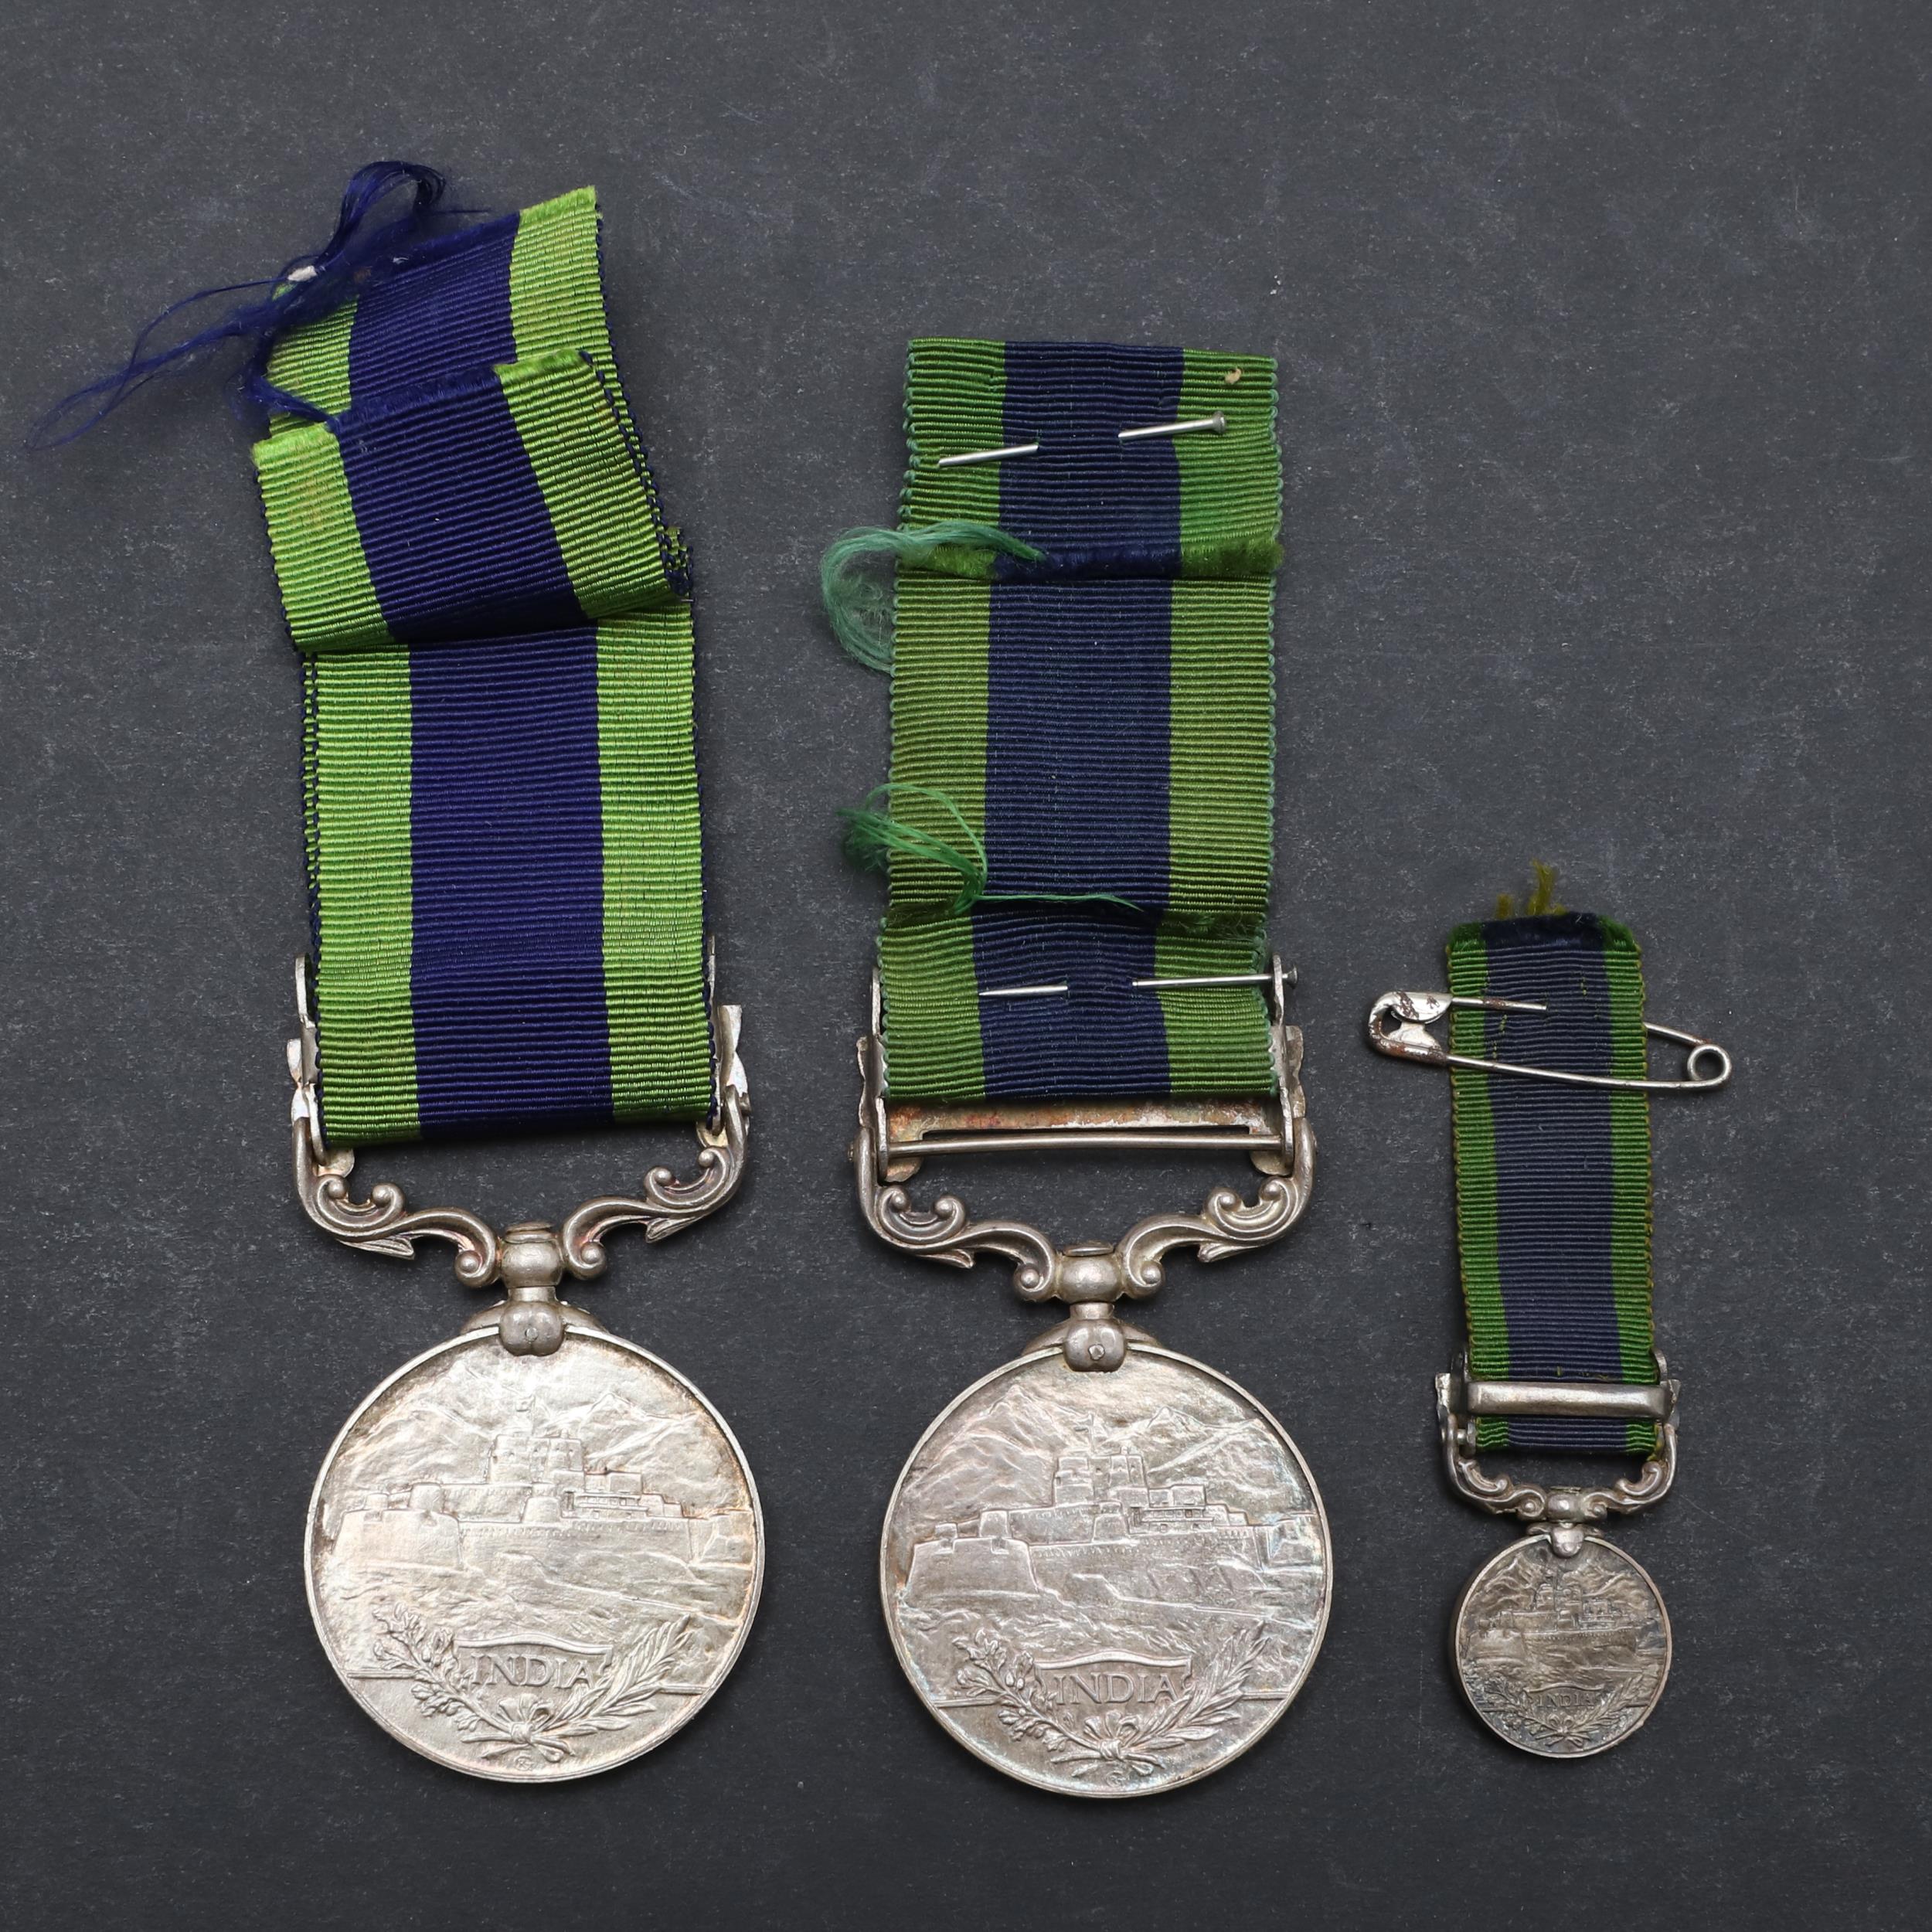 TWO INDIA GENERAL SERVICE MEDALS APPARENTLY AWARDED TO THE SAME MAN, A CASUALTY OF A BOMBING INCIDEN - Image 5 of 8